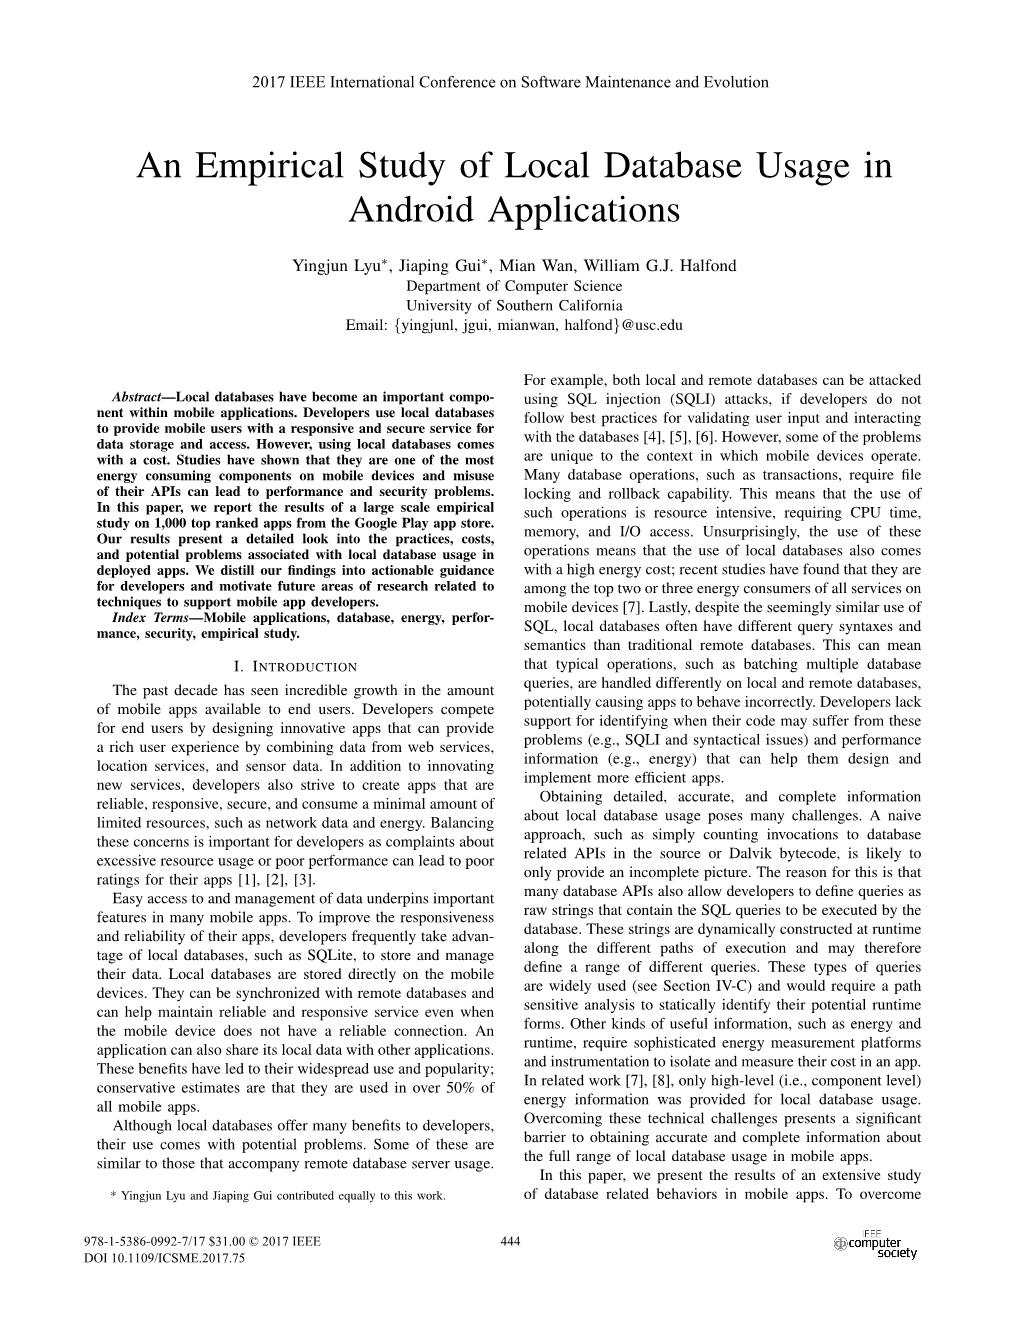 An Empirical Study of Local Database Usage in Android Applications